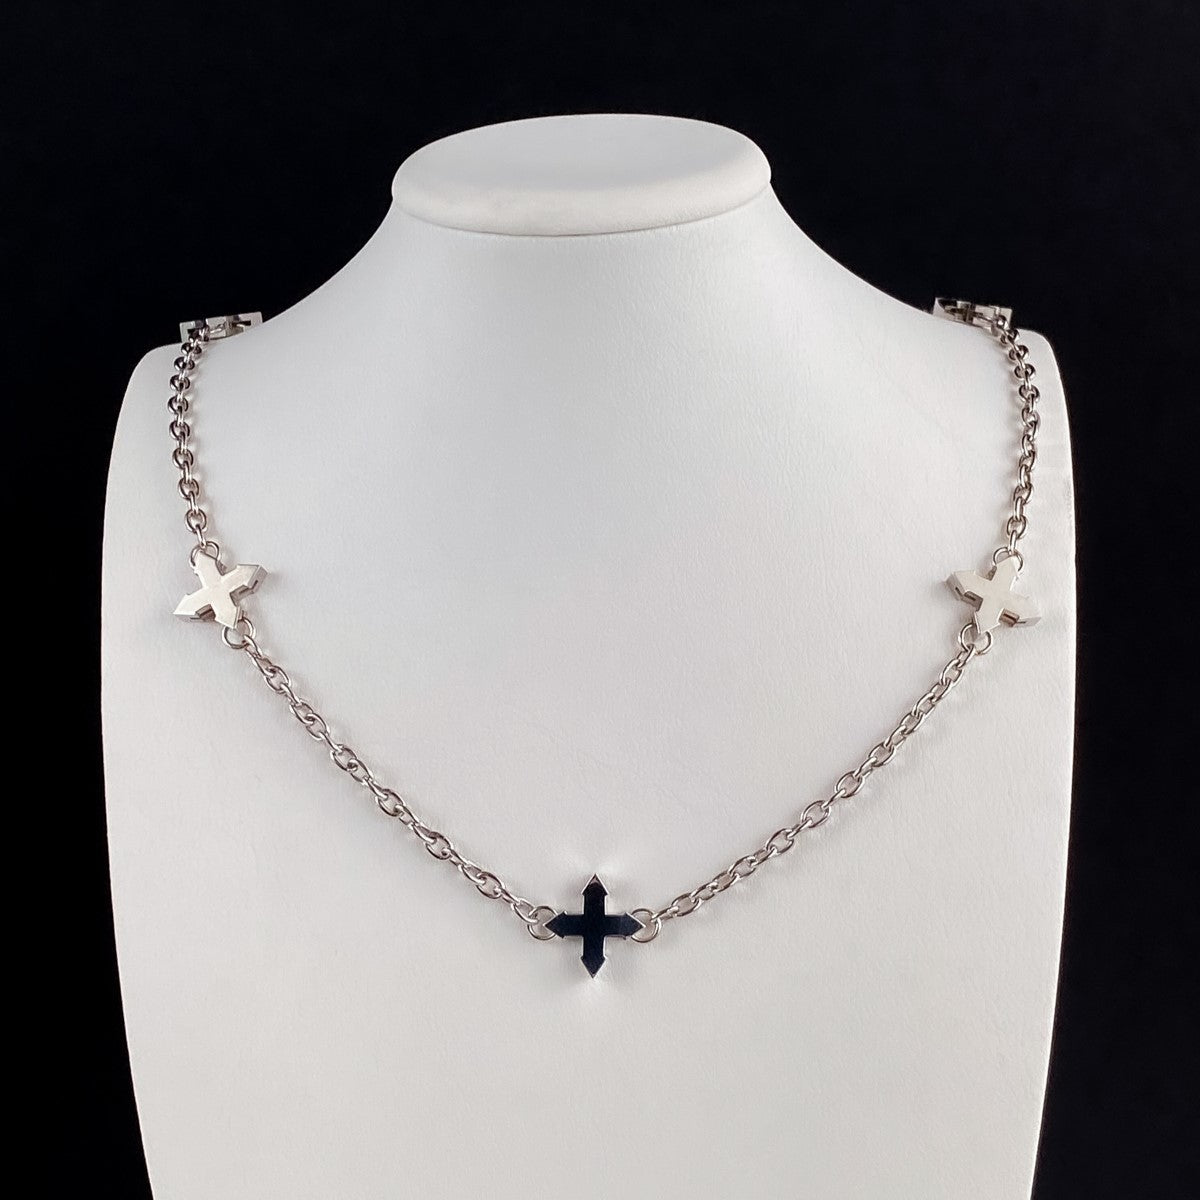 NECKLACE "FIVE STARS" / SILVER